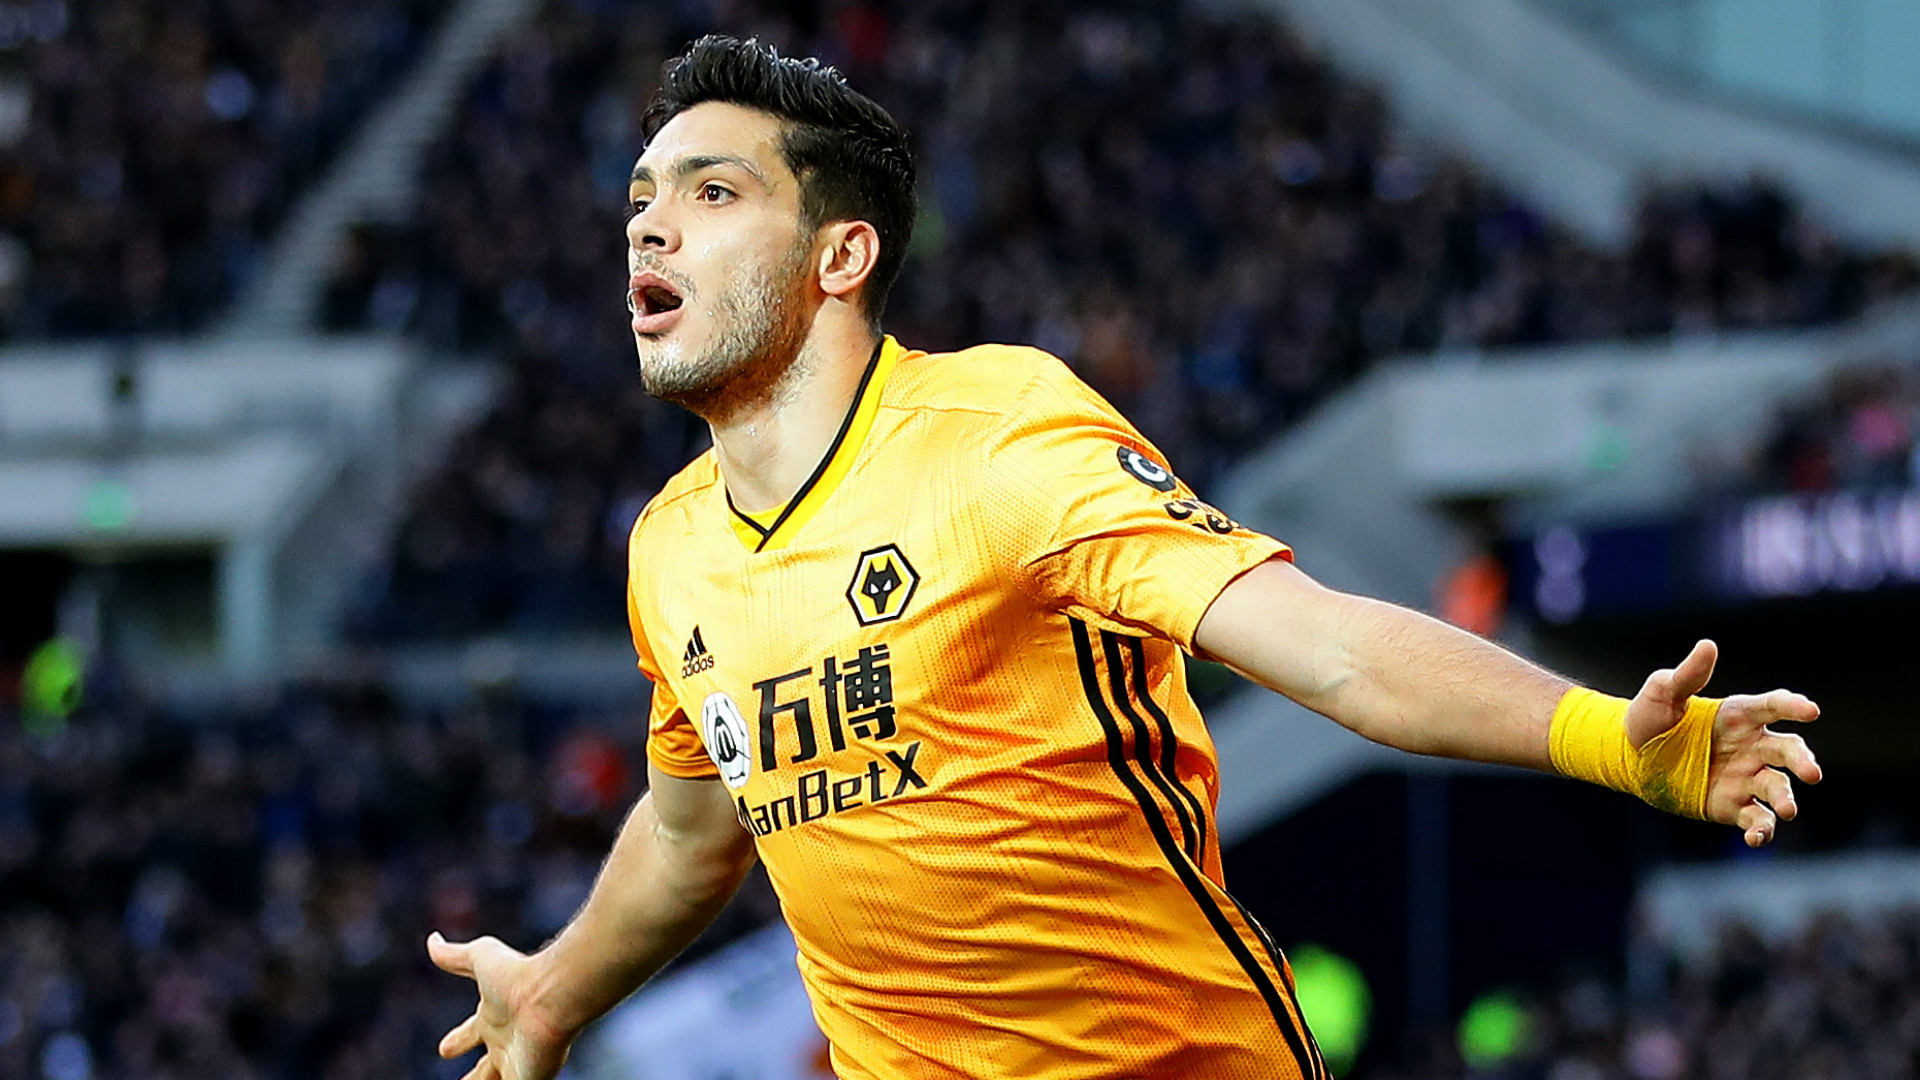 Man Utd target Jimenez says he is 'very happy' at Wolves